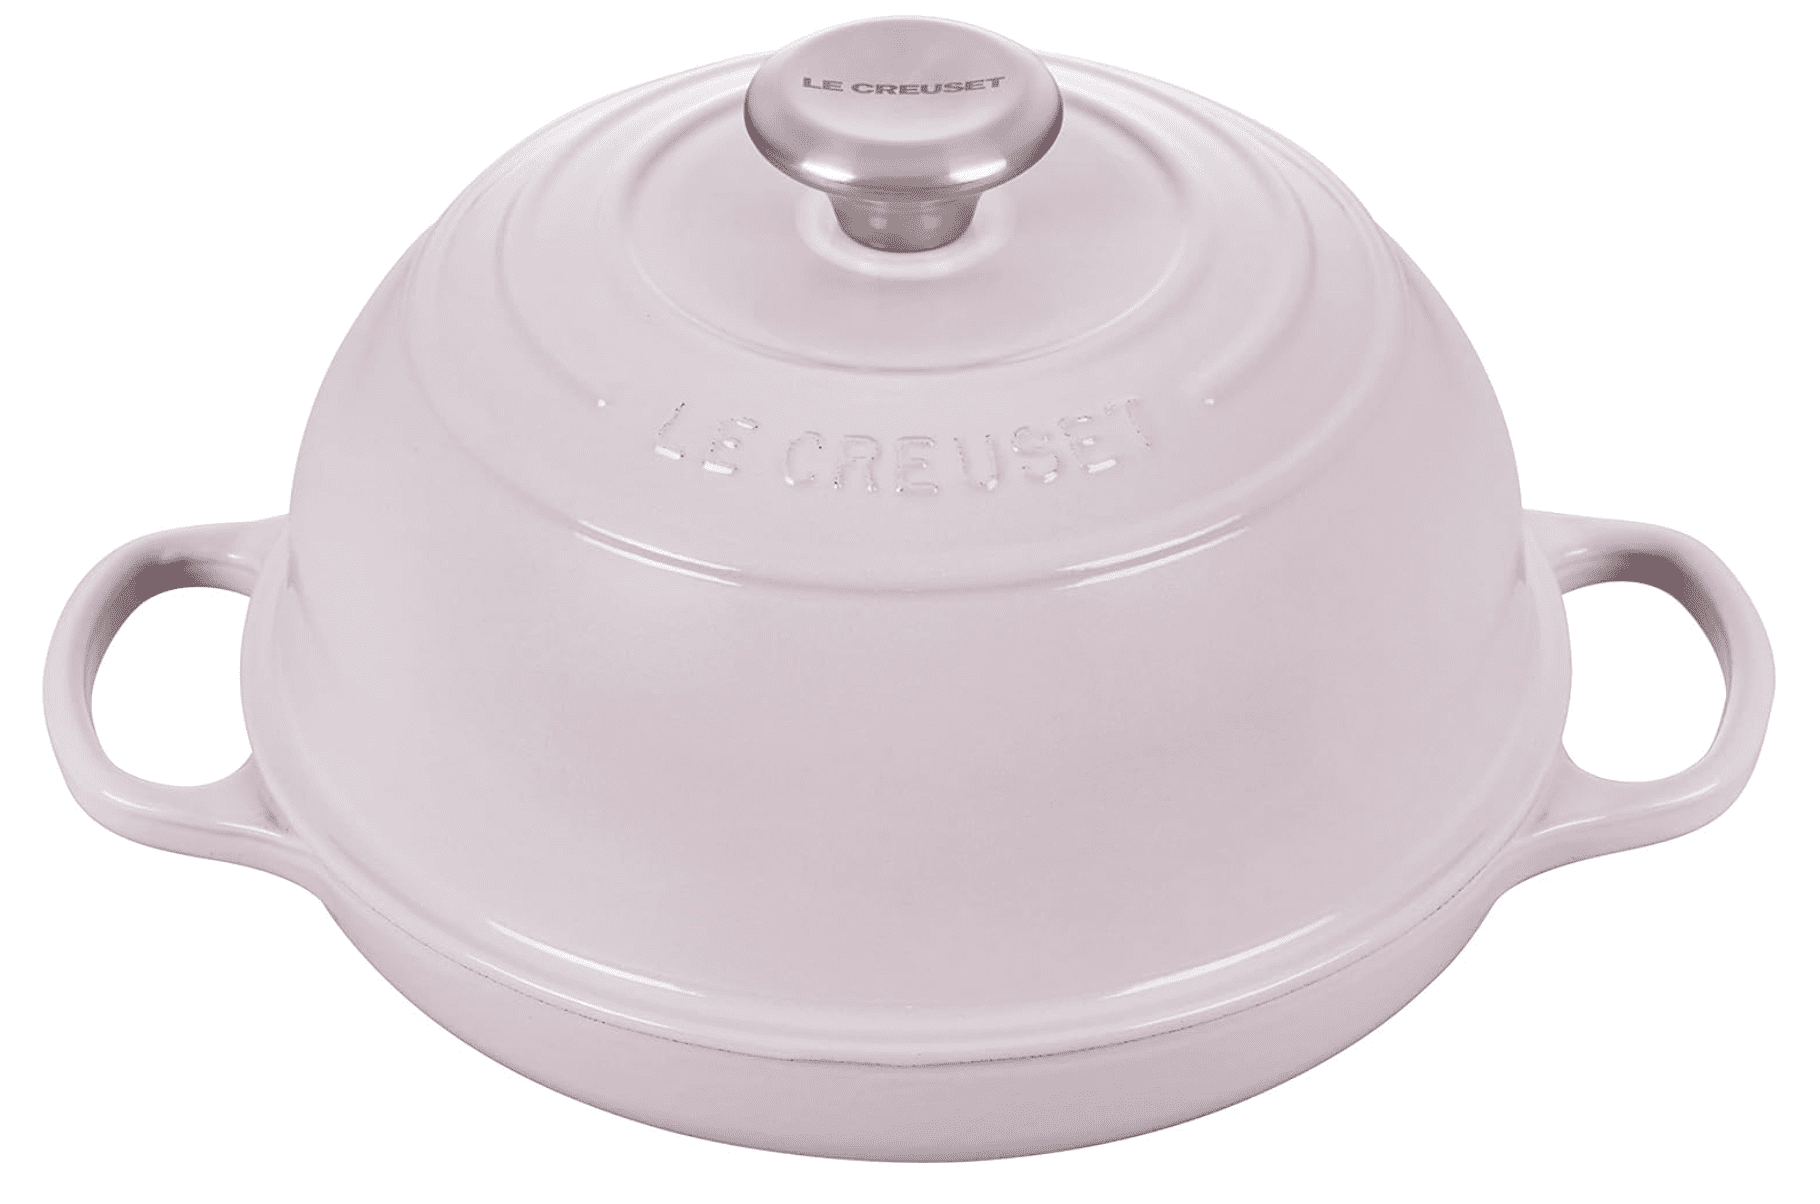 https://cdn.apartmenttherapy.info/image/upload/v1698848287/commerce/Amazon-Le-Creuset-Bread-Oven.png